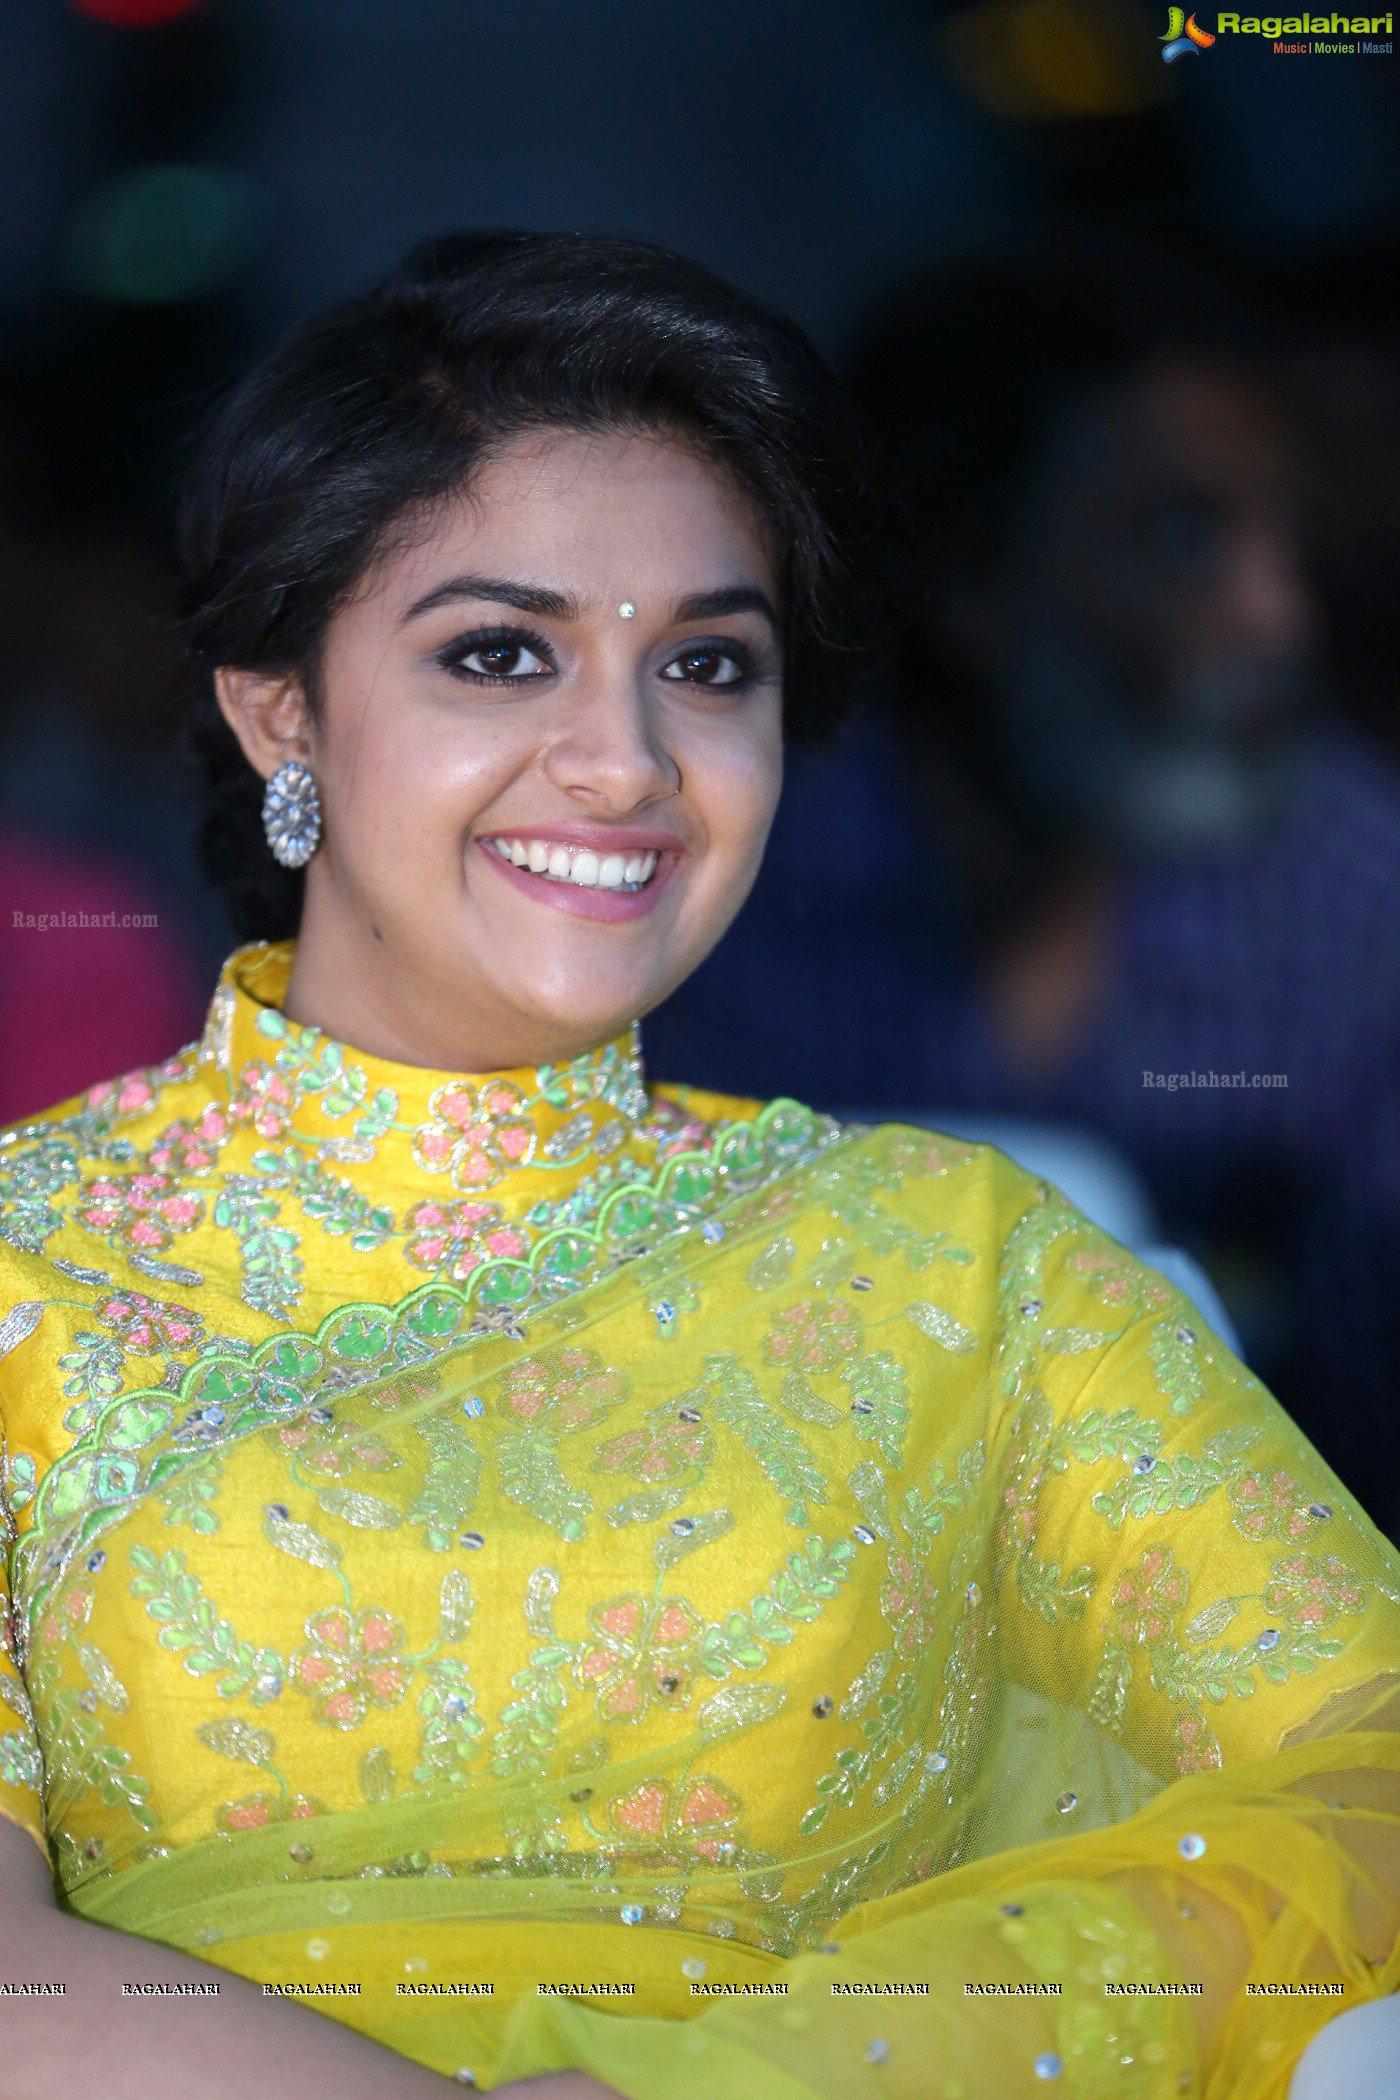 Keerthy Suresh (Posters) Image 42. Tollywood actress image